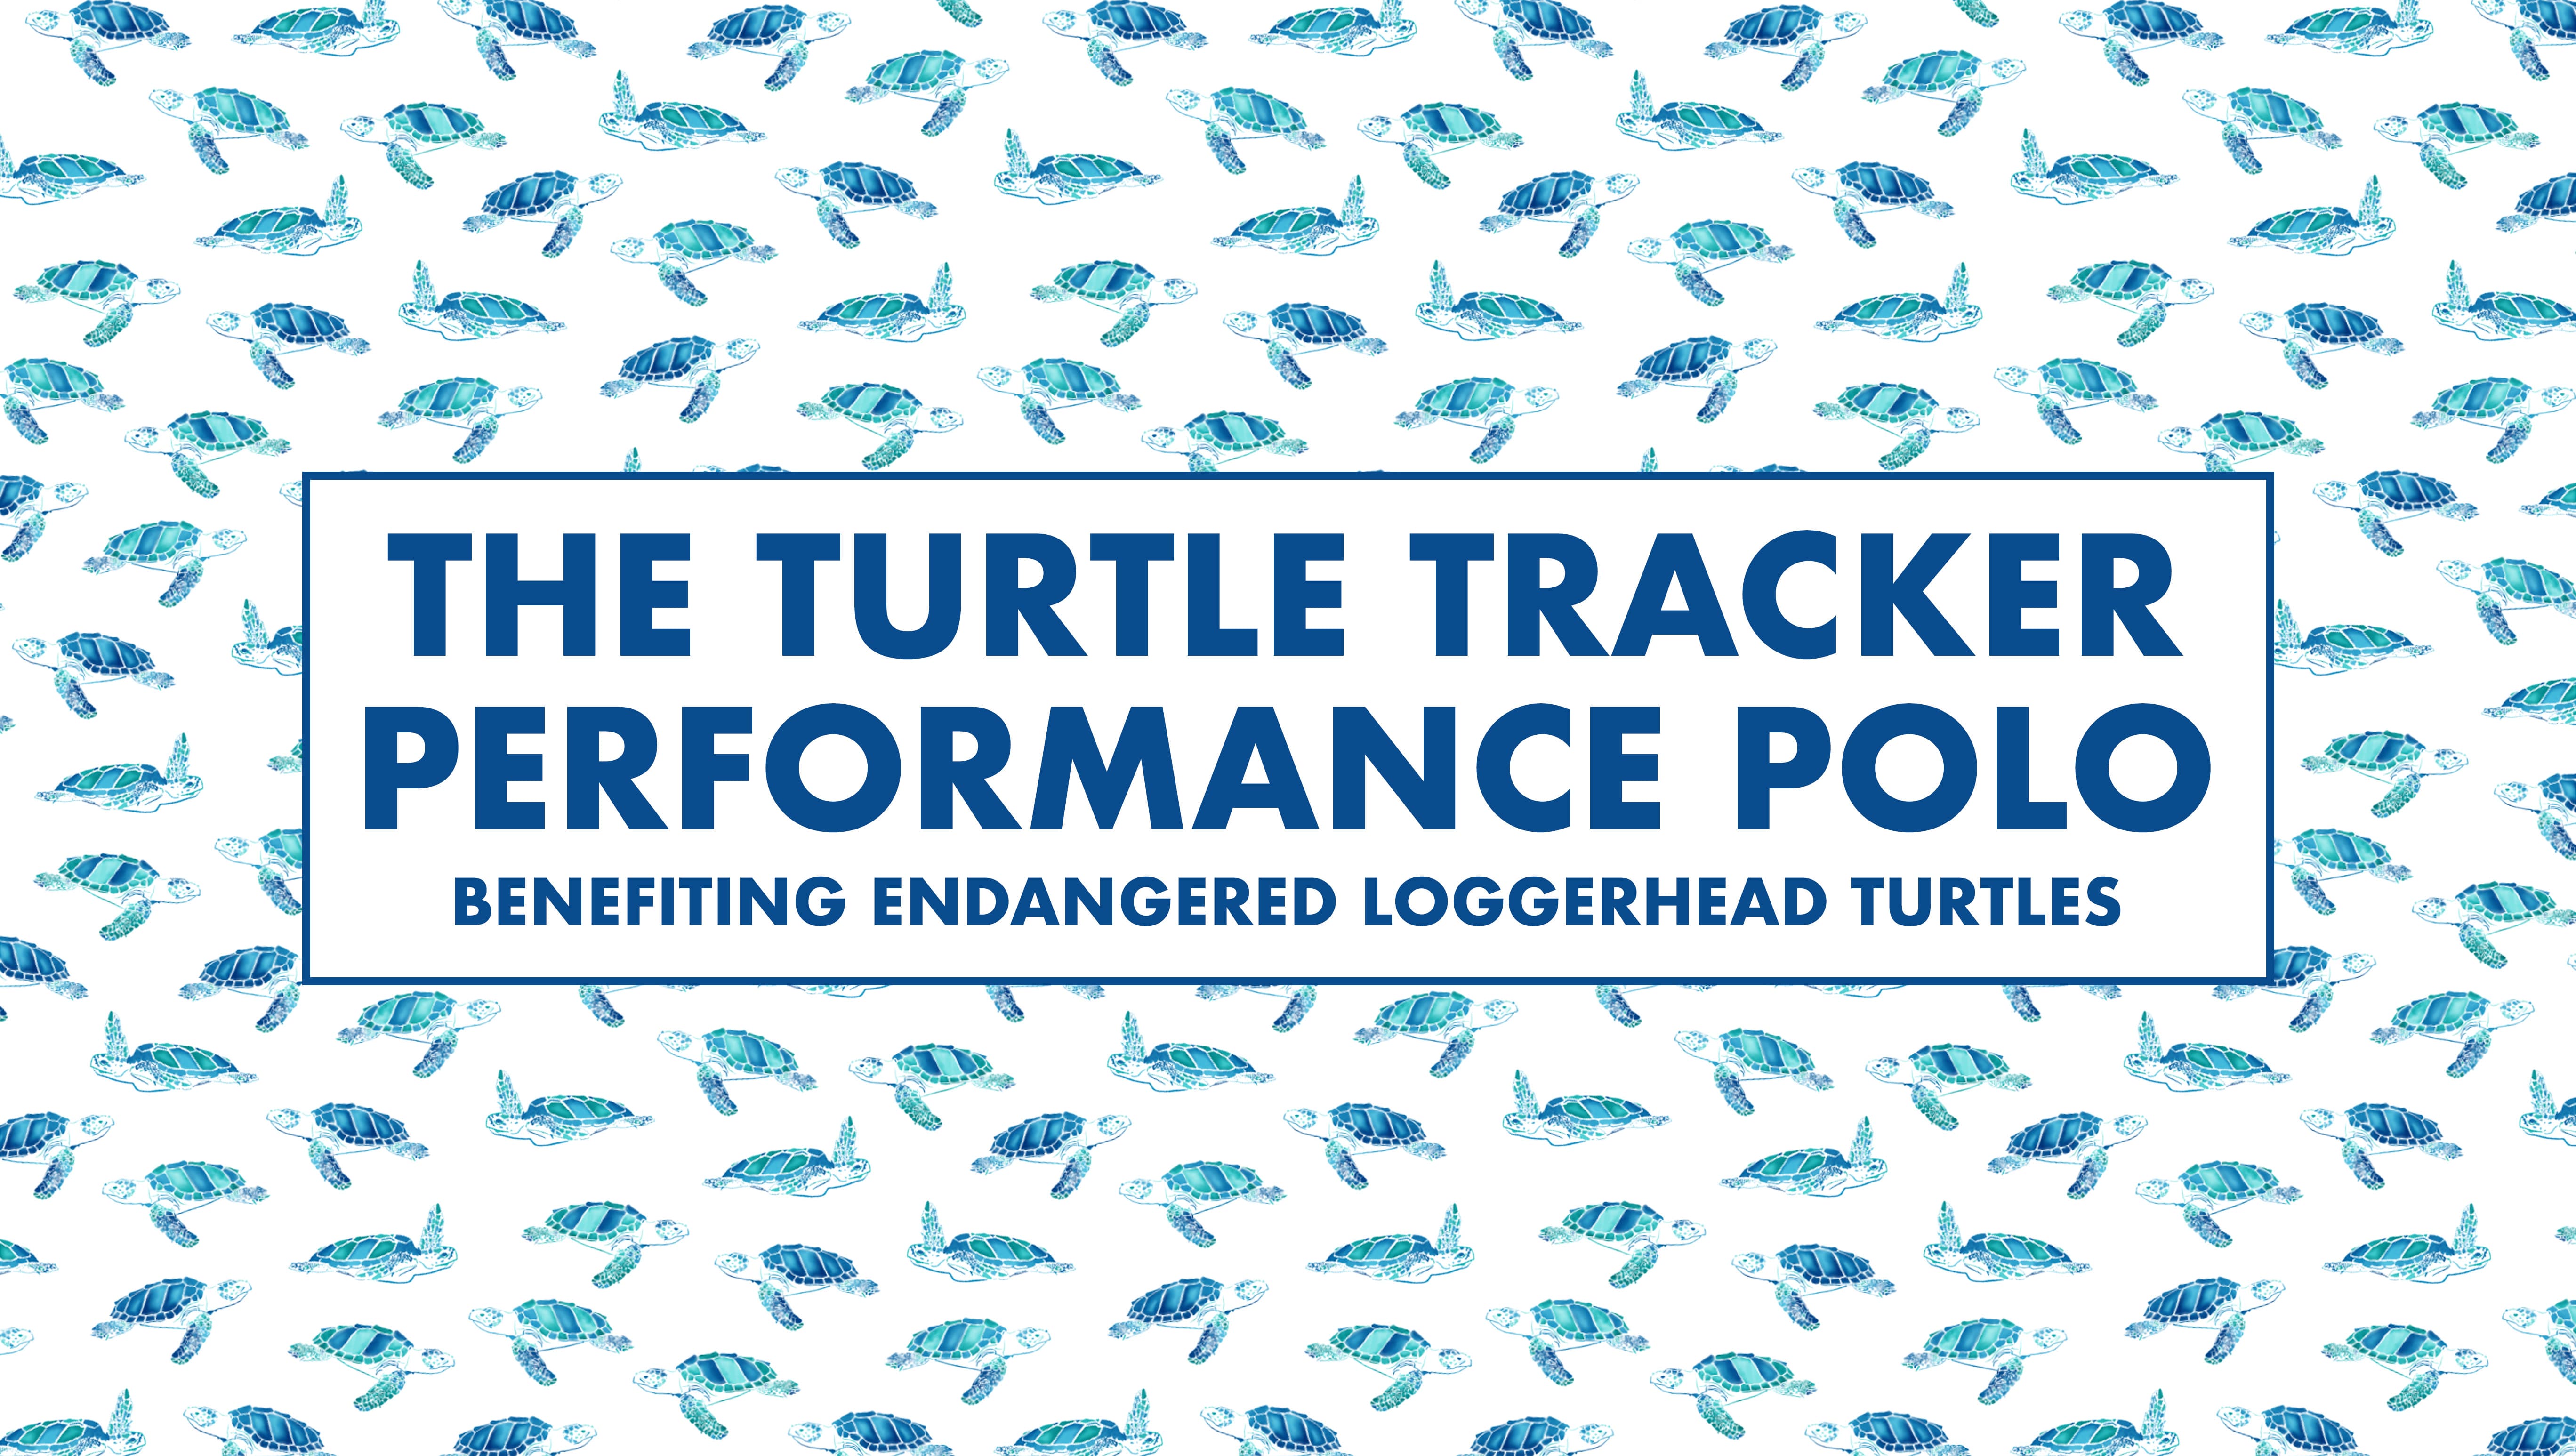 The Turtle Tracker Performance Polo